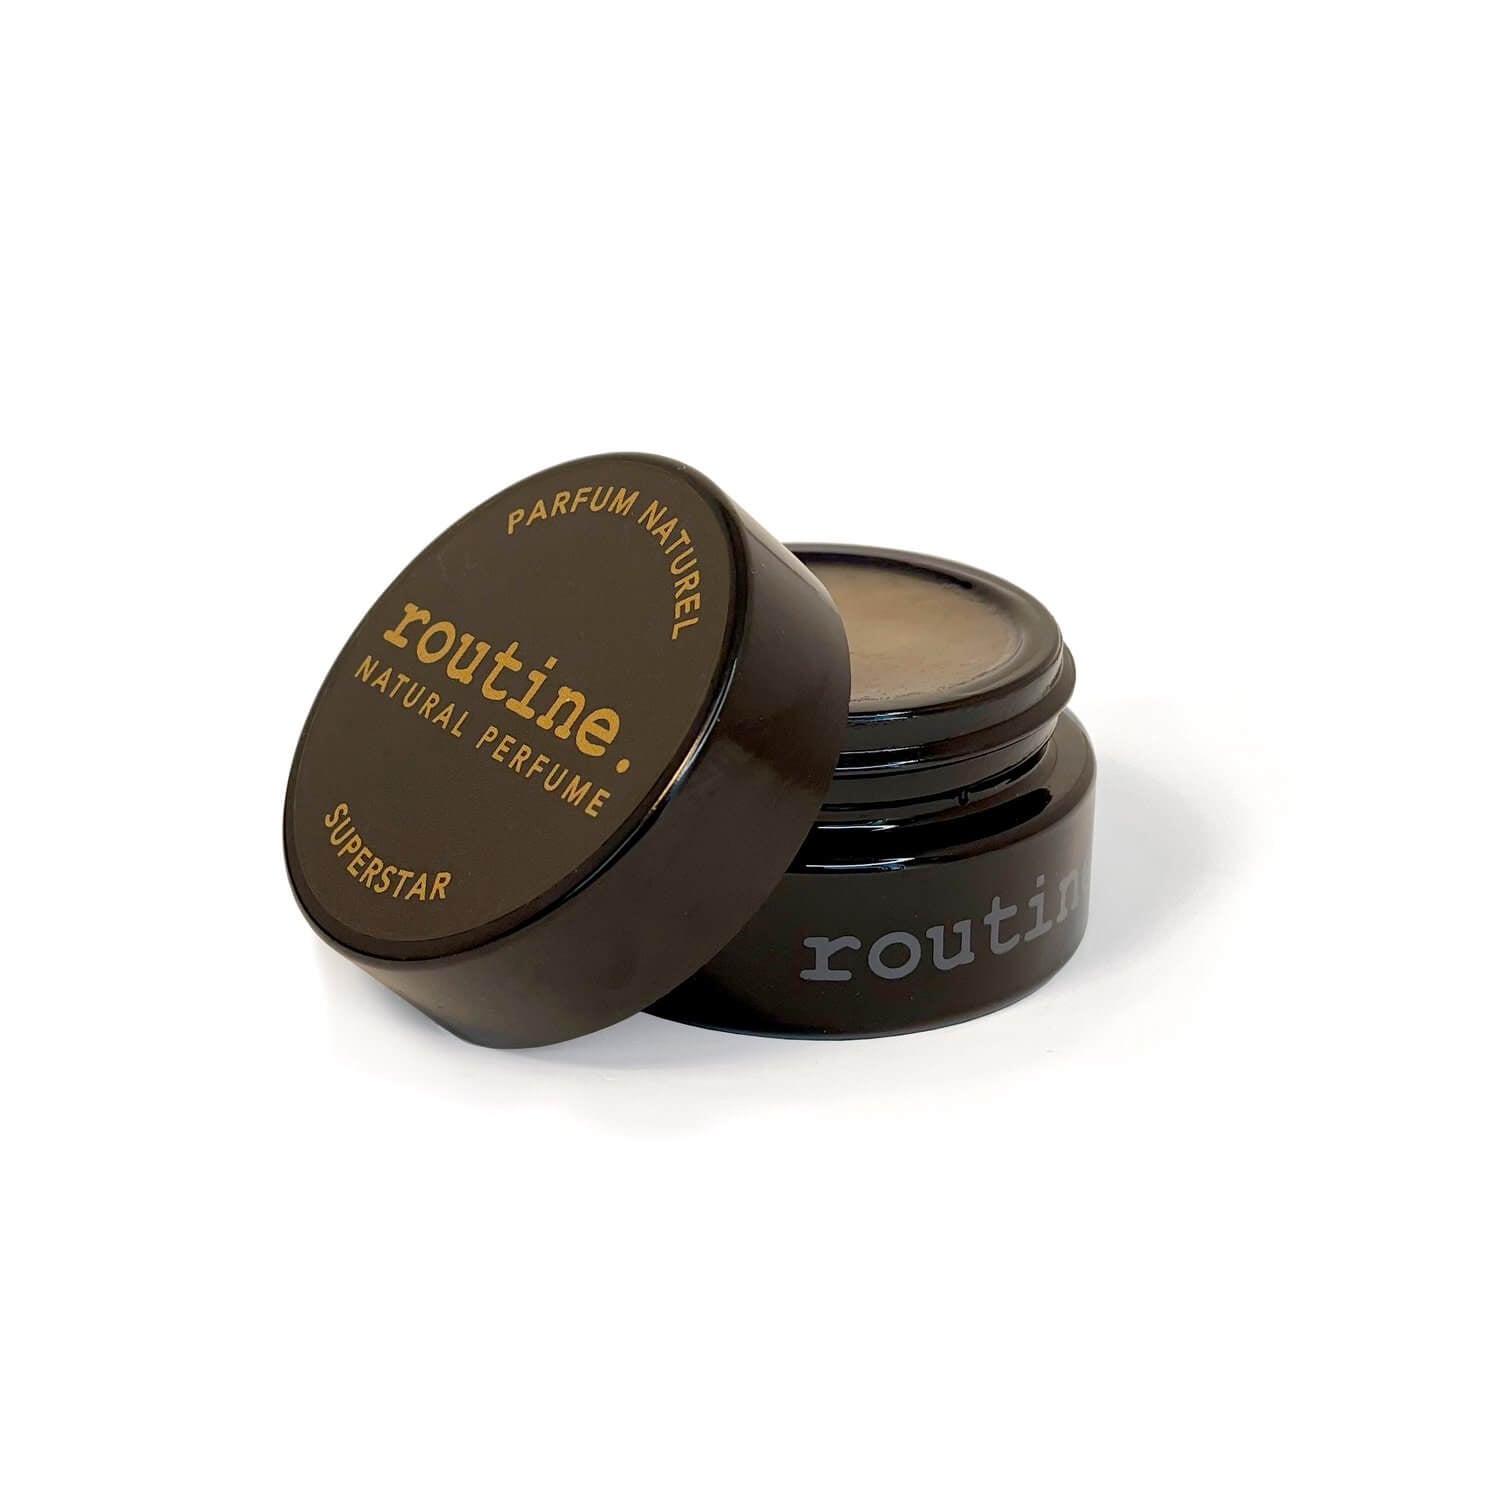 Superstar - Solid Perfume by Routine Bath and Body Routine Prettycleanshop